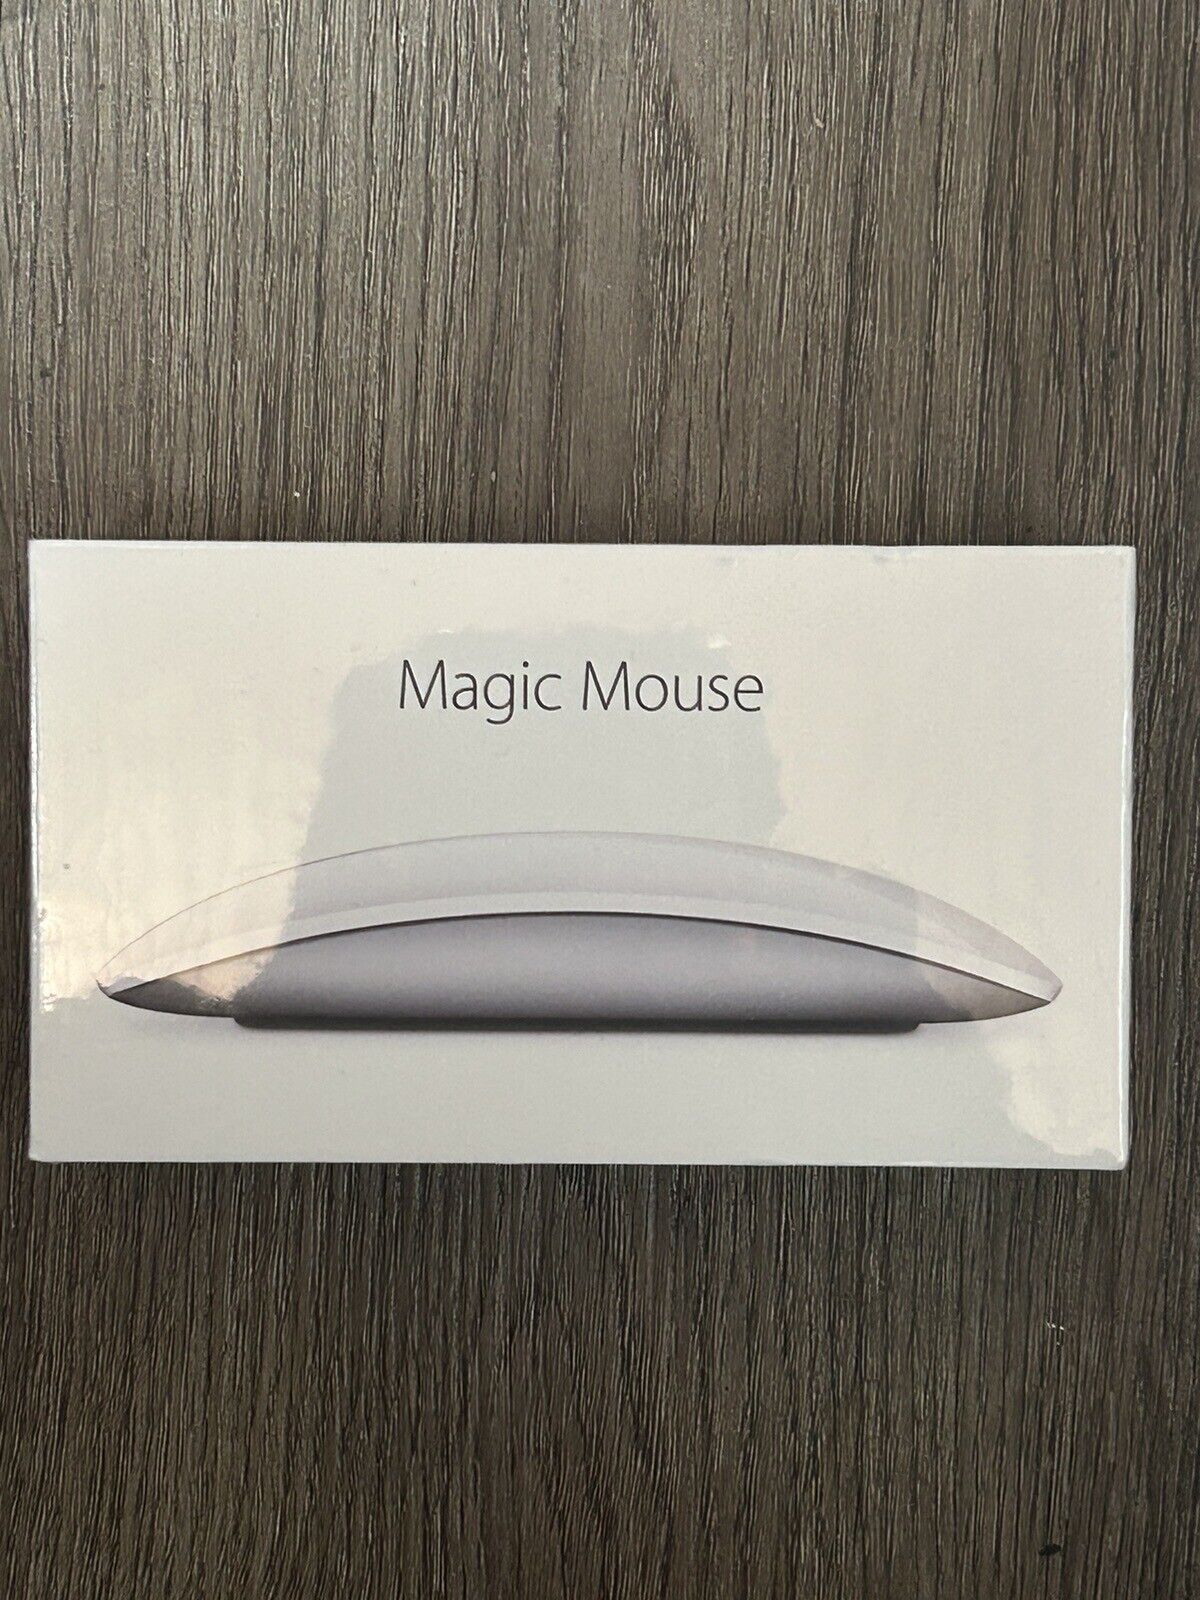 Apple Magic Mouse 2 Wireless Mouse A1657 White New Sealed MLA02LL/A